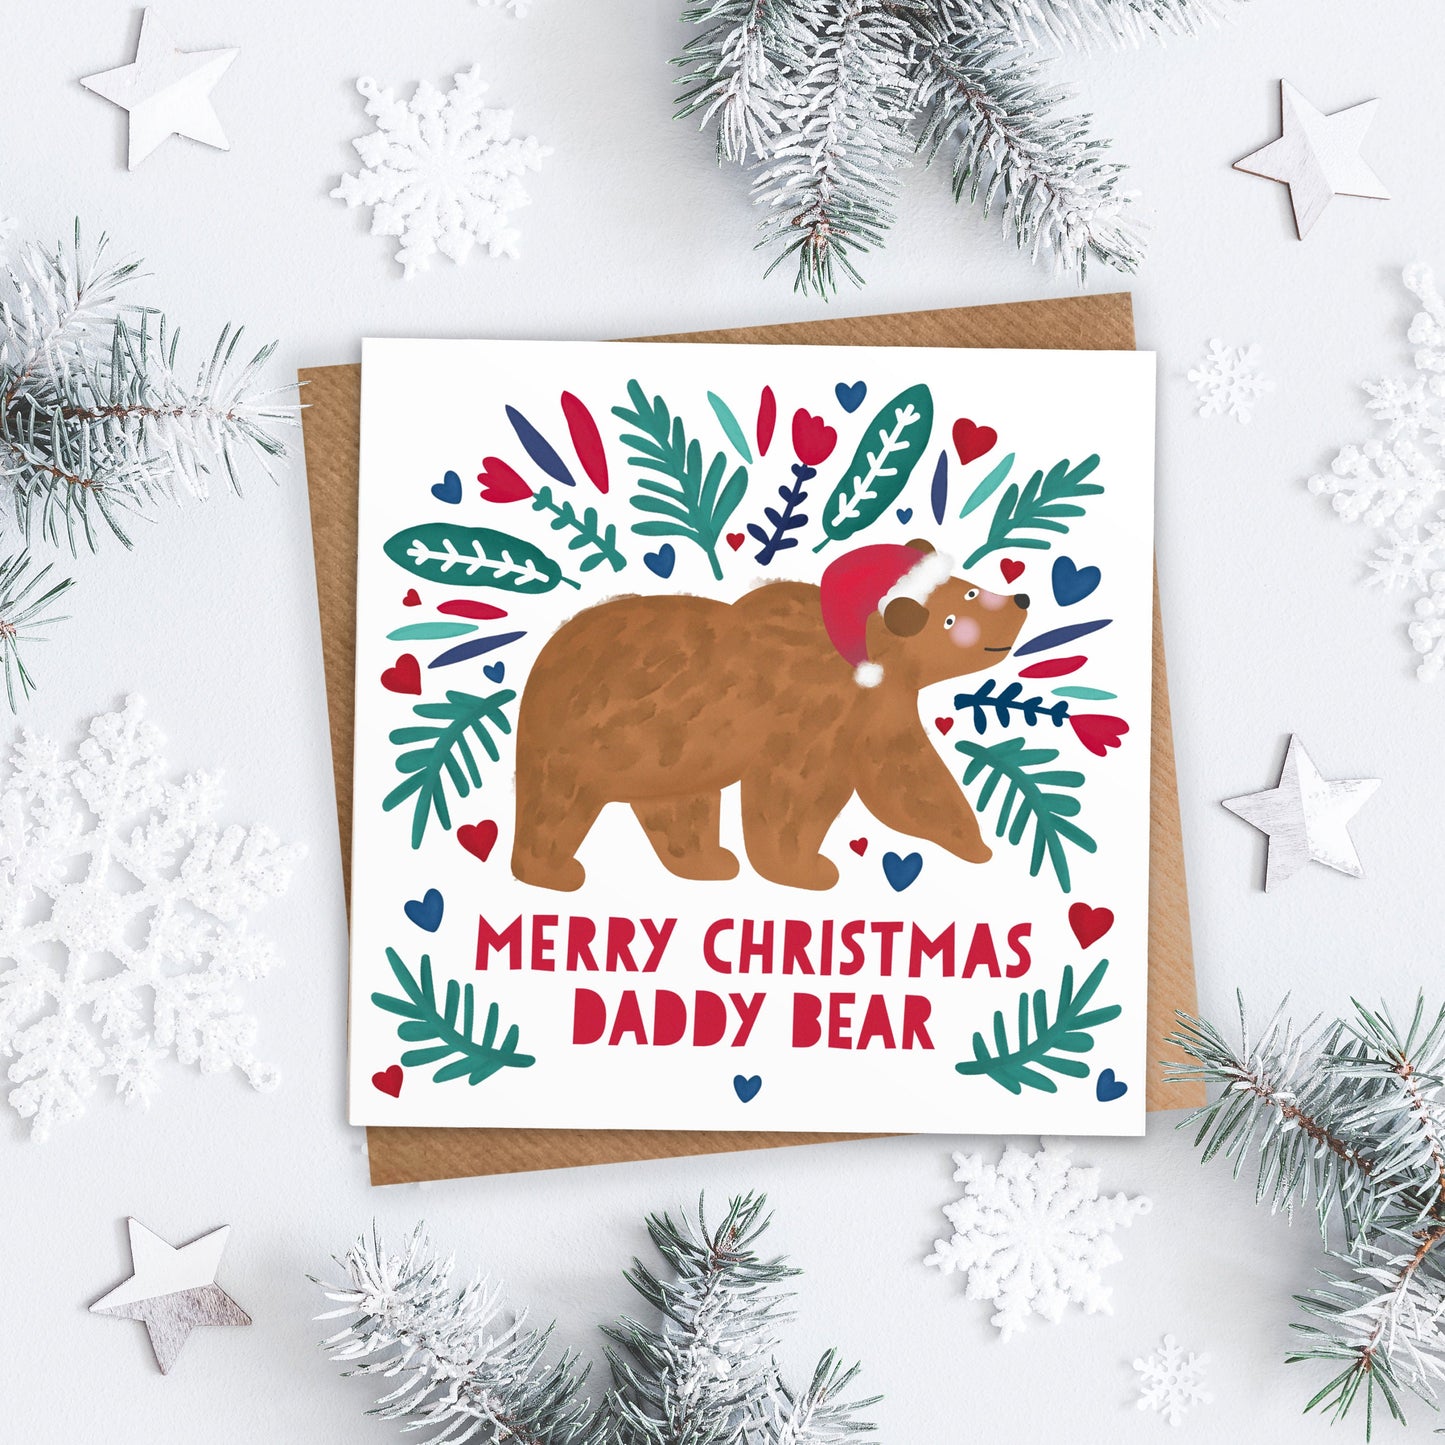 Merry Christmas Bear Card. Personalise for Daddy, Mummy, Grandpa, Granny etc. Personalised Christmas Card. Send Direct Option.